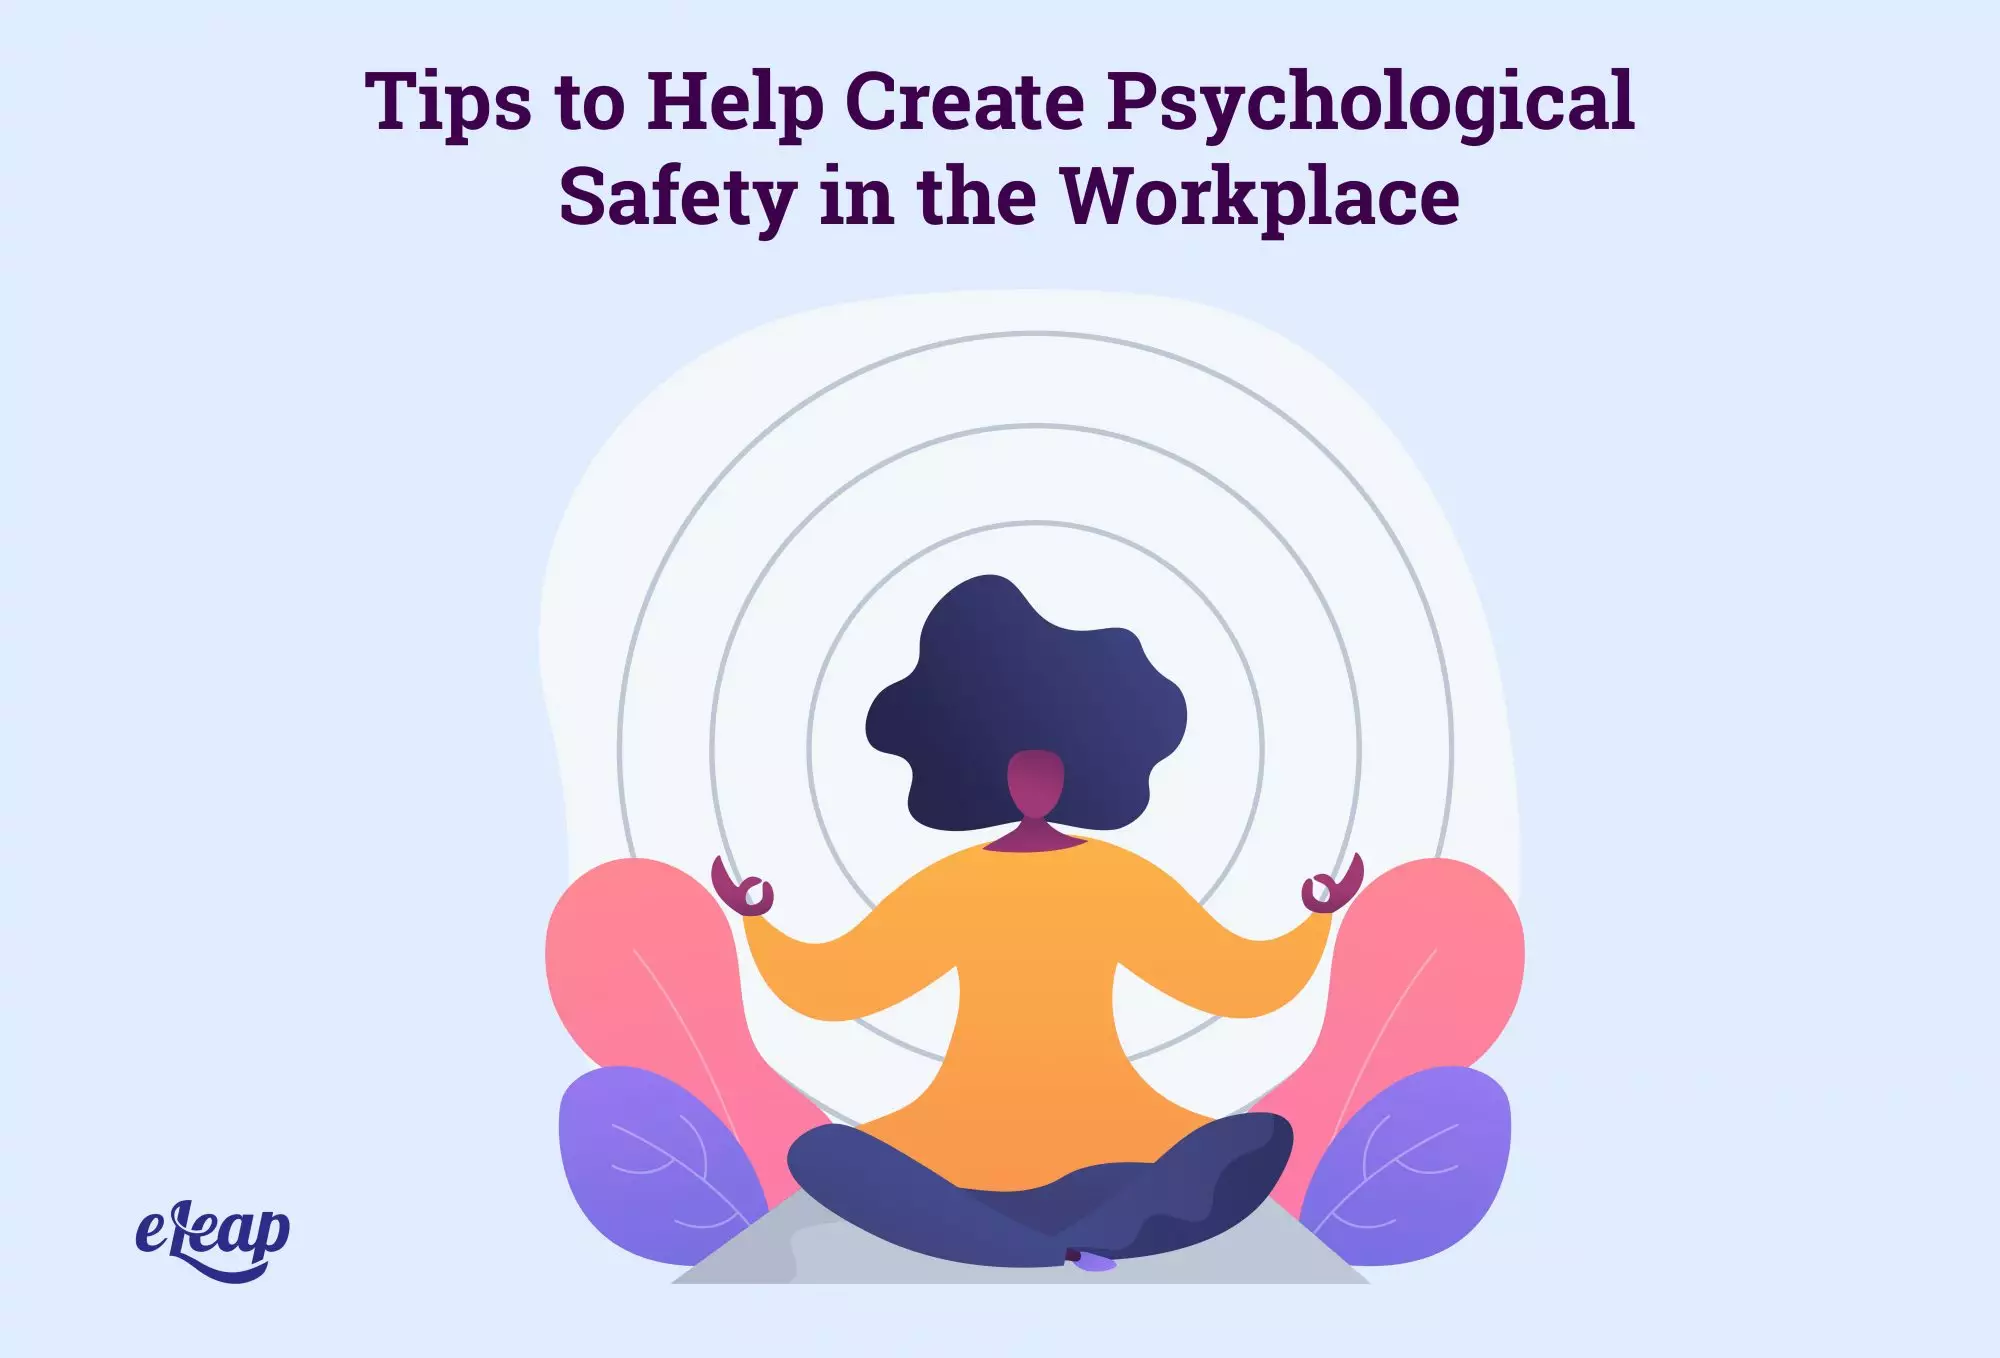 Tips to Help Create Psychological Safety in the Workplace